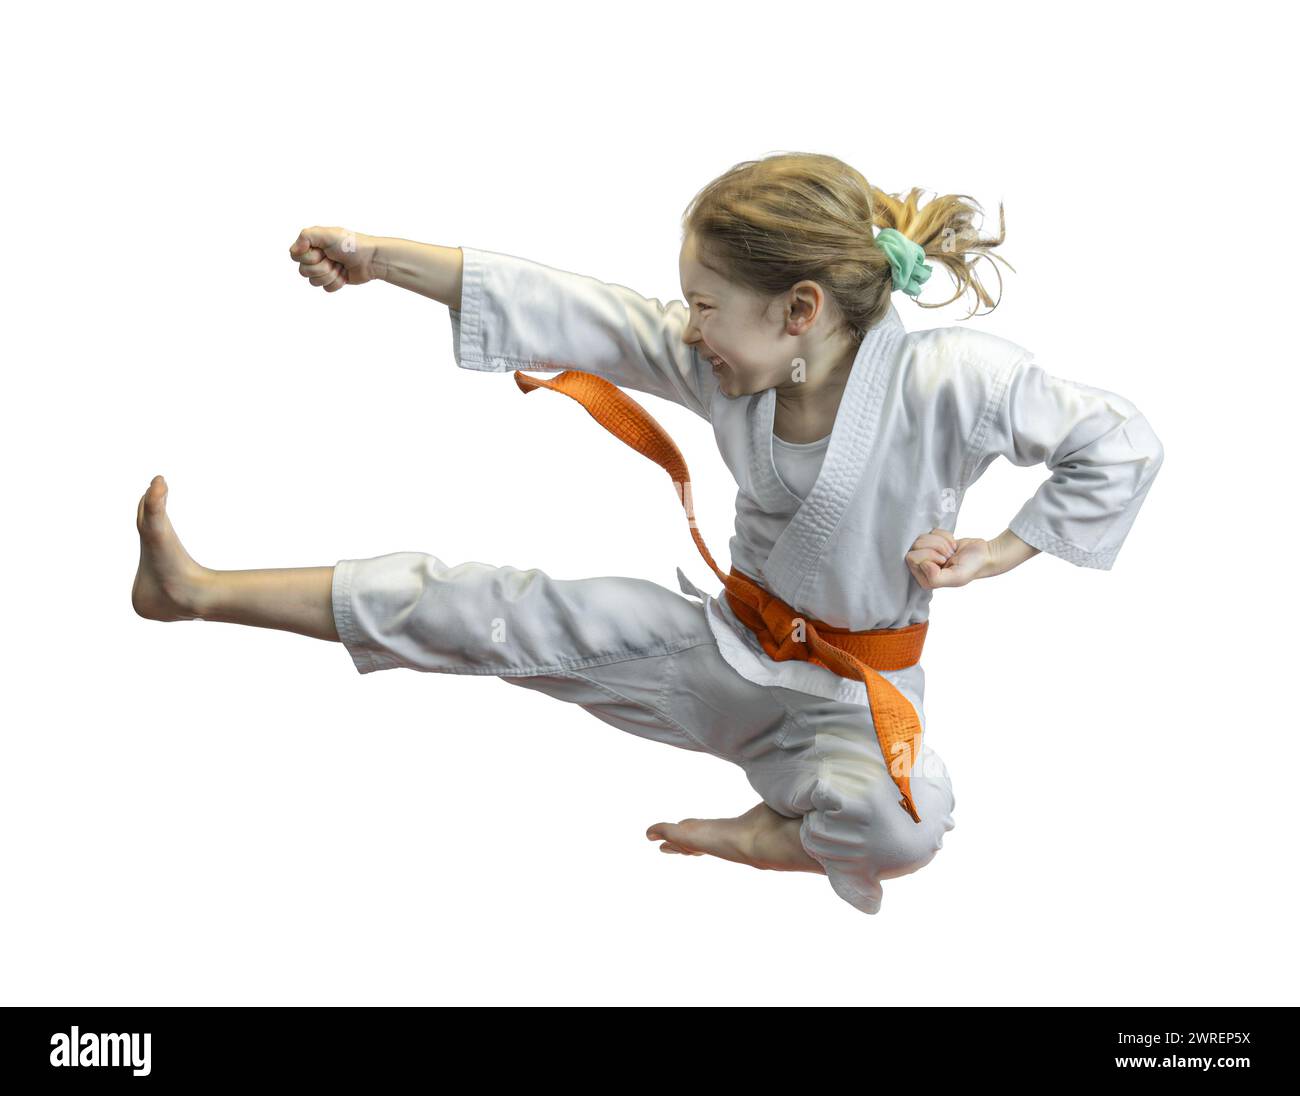 Energetic young girl in a karate uniform performing a high kick Stock Photo